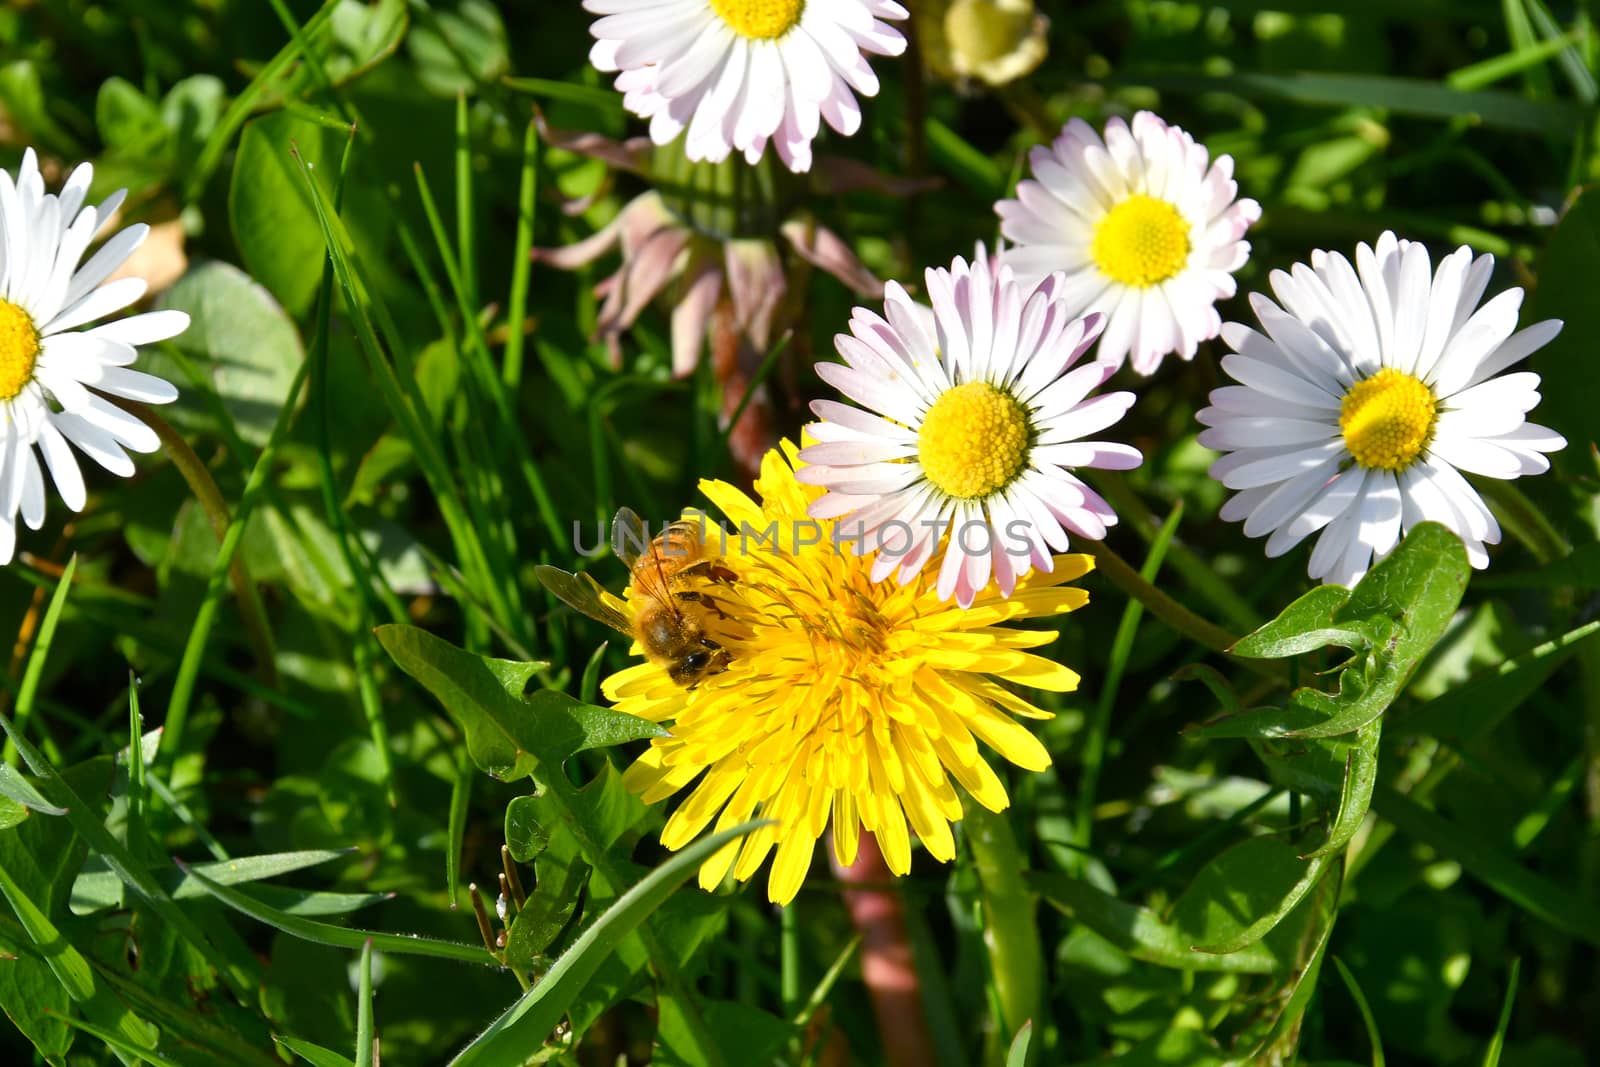 The bee collects nectar from the yellow flowers of the dandelion pollinates them